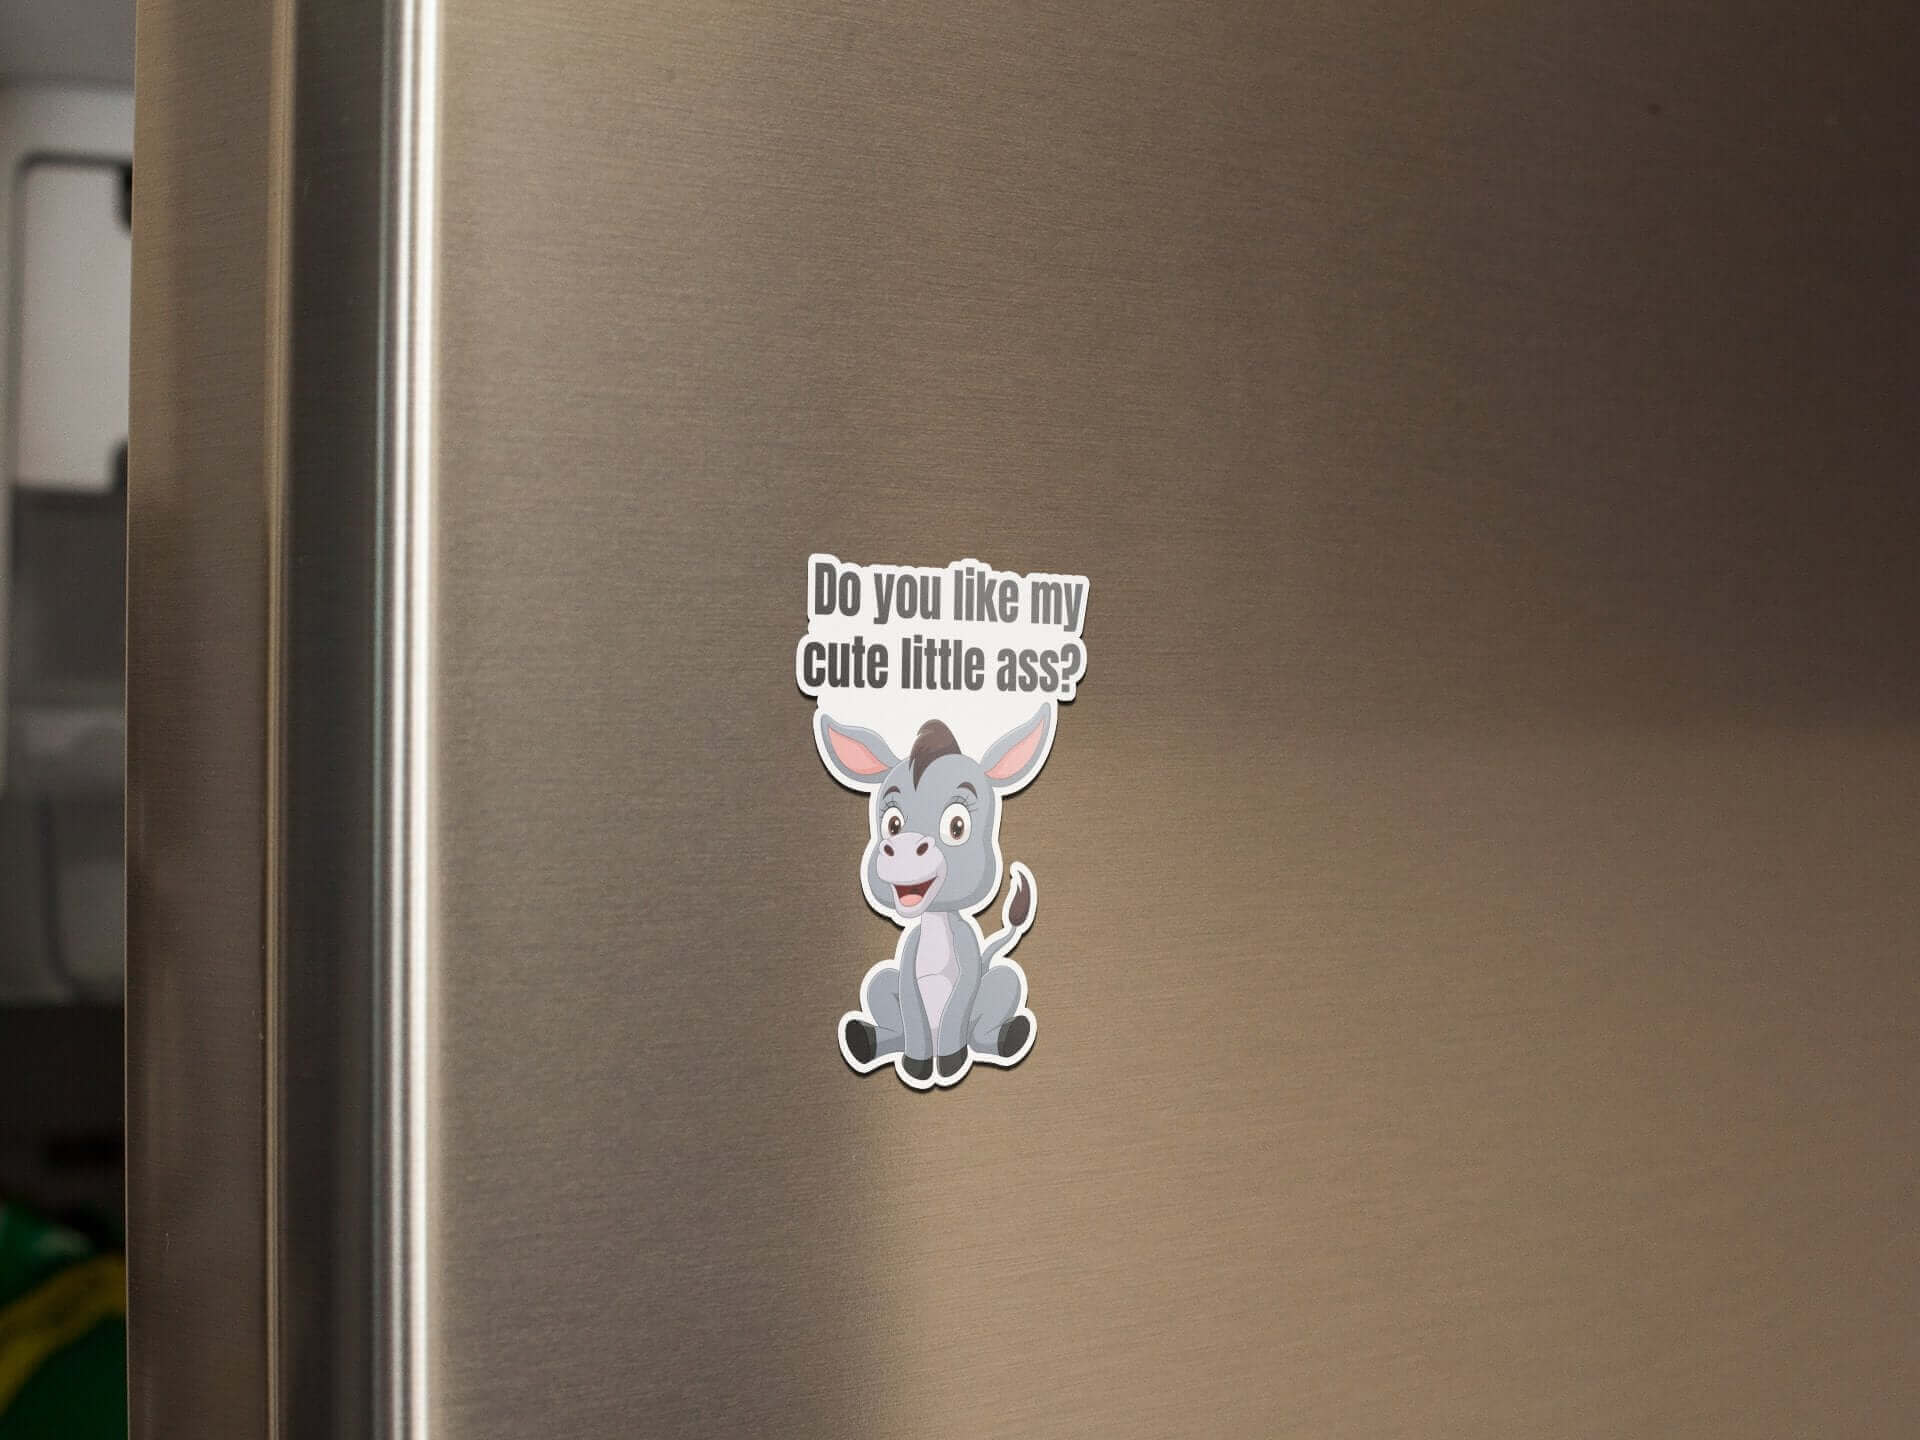 Do you like my little ass? - Fridge magnet ass Boho chic cute donkey family Fridge magnet funny gift for mom gift for wife Handmade Home organization Kitchen decor little donkey magnet Magnetic clip Magnetic photo holder Modern design Note holder Office accessory Reminder board Rustic decor Shopping list Strong magnet Unique gift Vintage style